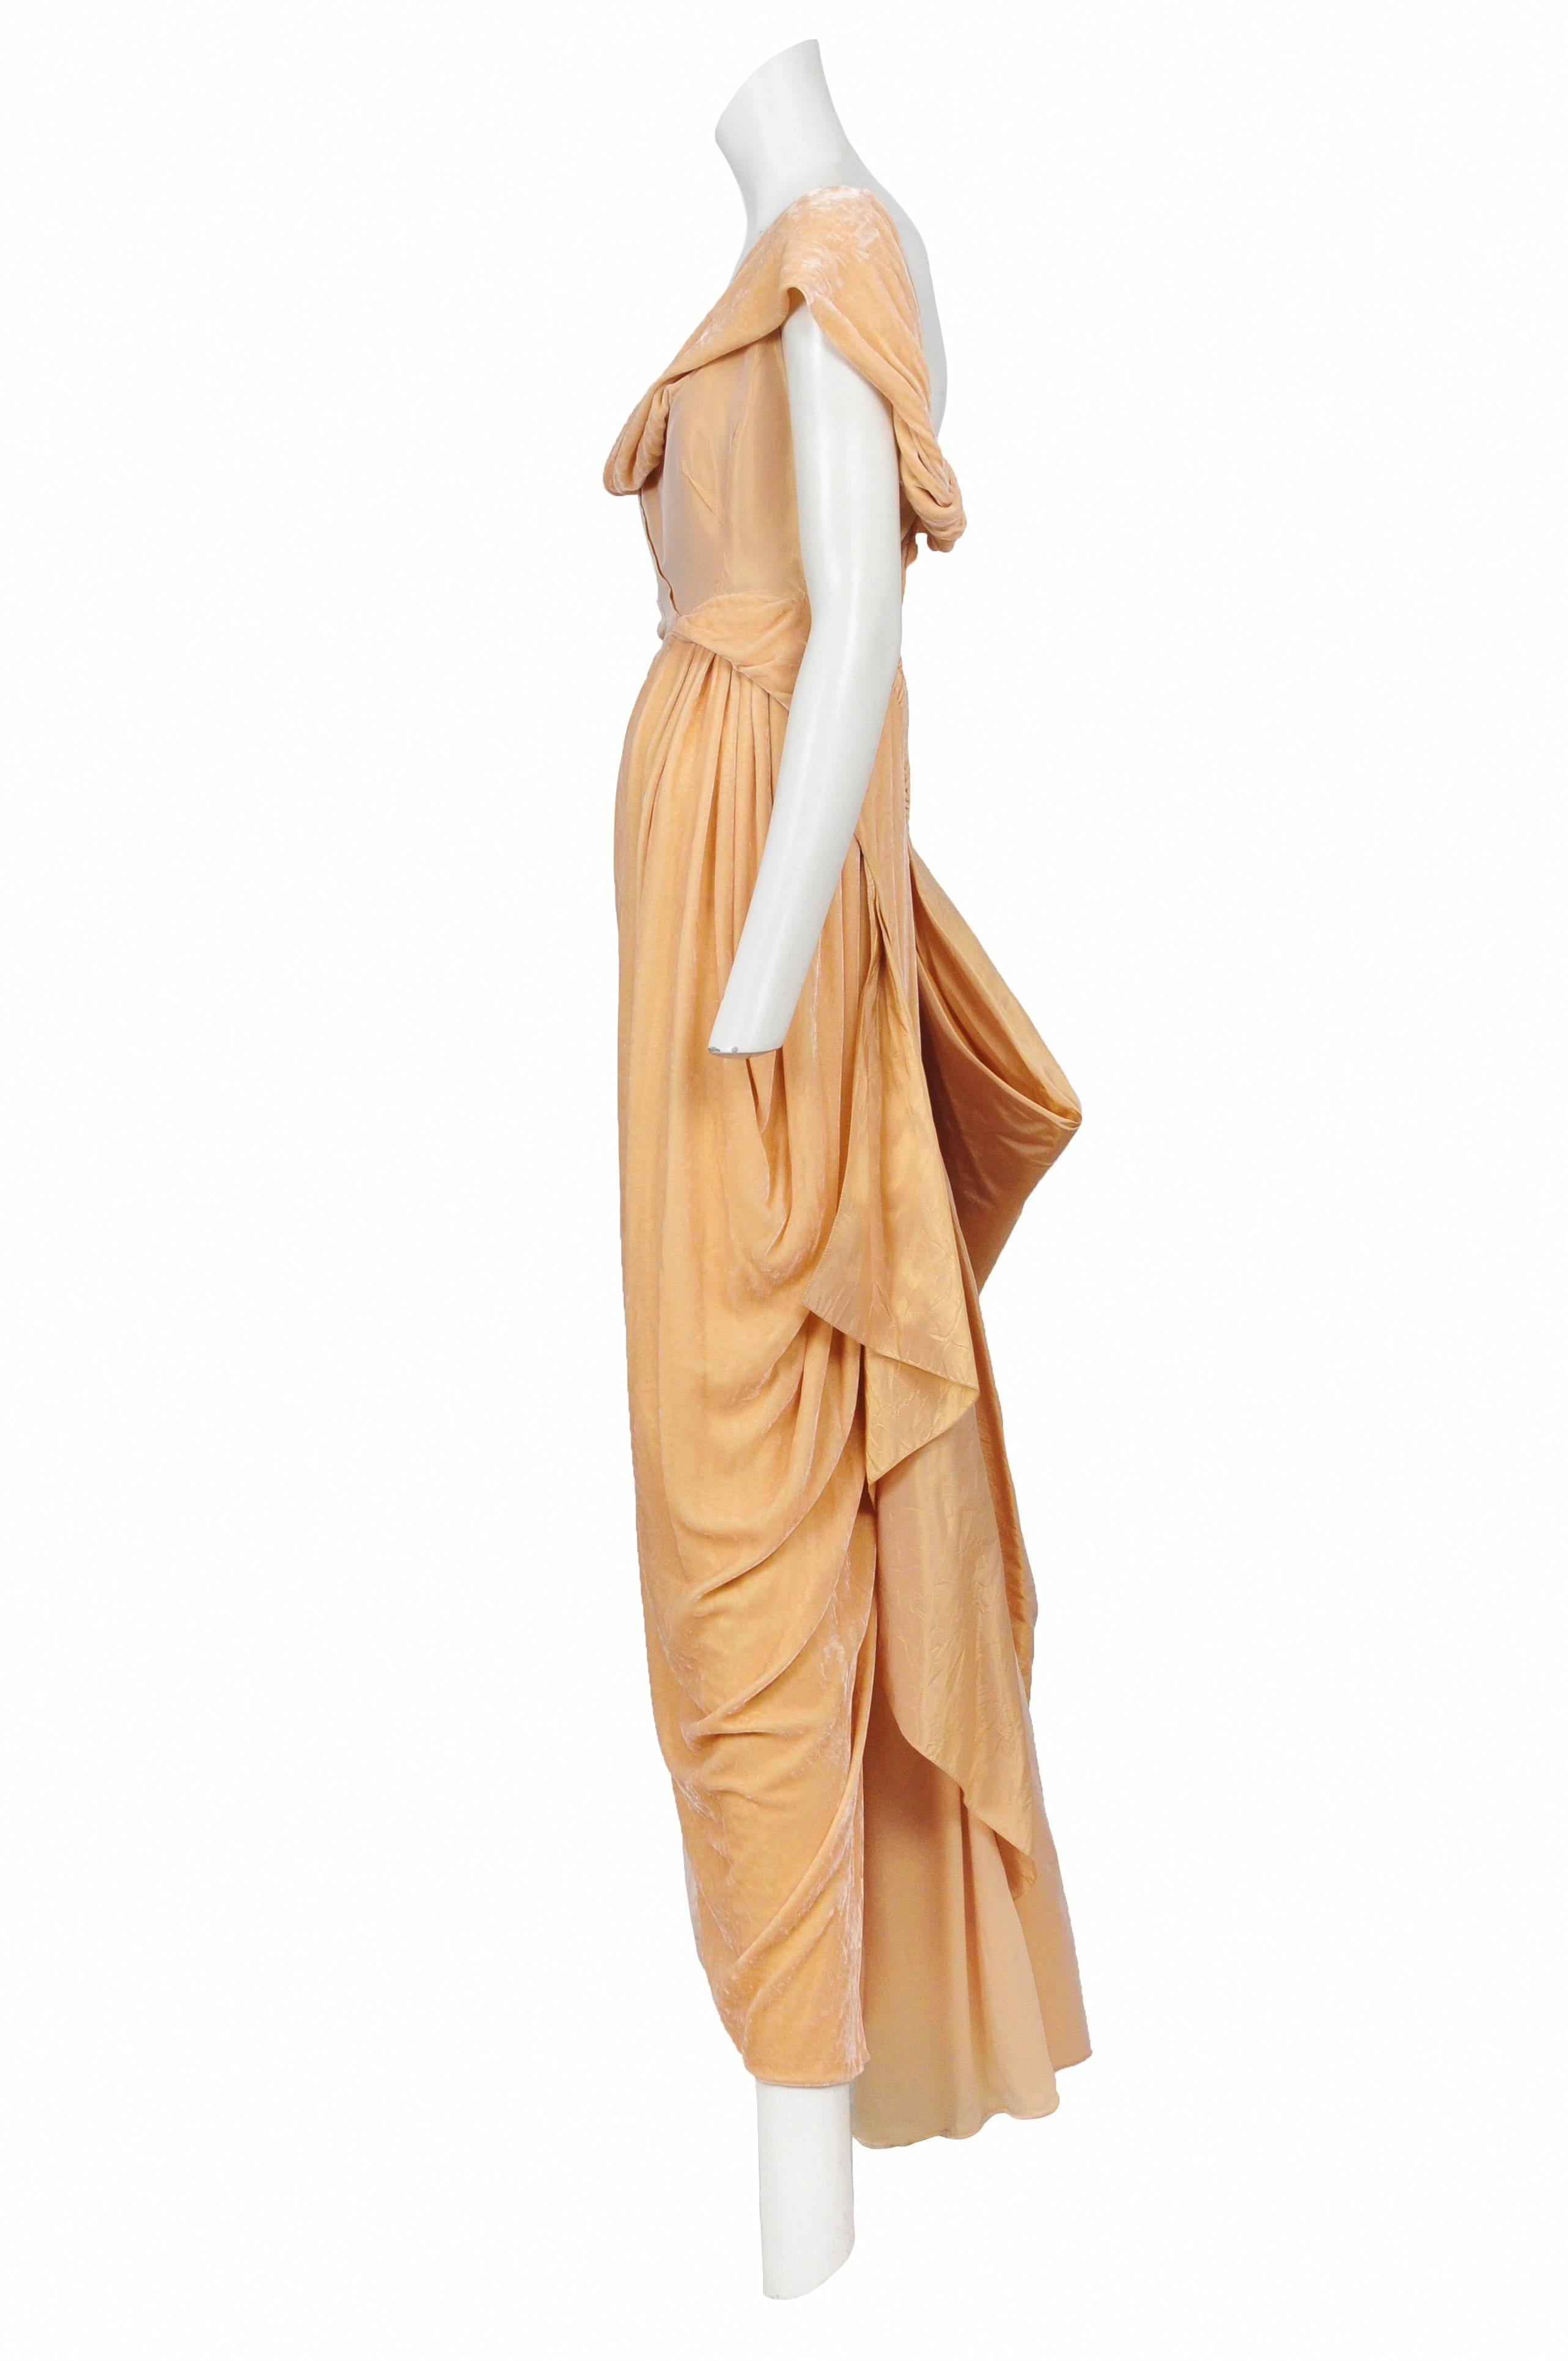 Vintage John Galliano peach iridescent taffeta and velvet drape gown featuring an asymmetrical cowl neckline, velvet drapery at hip and a covered button closure along the side.